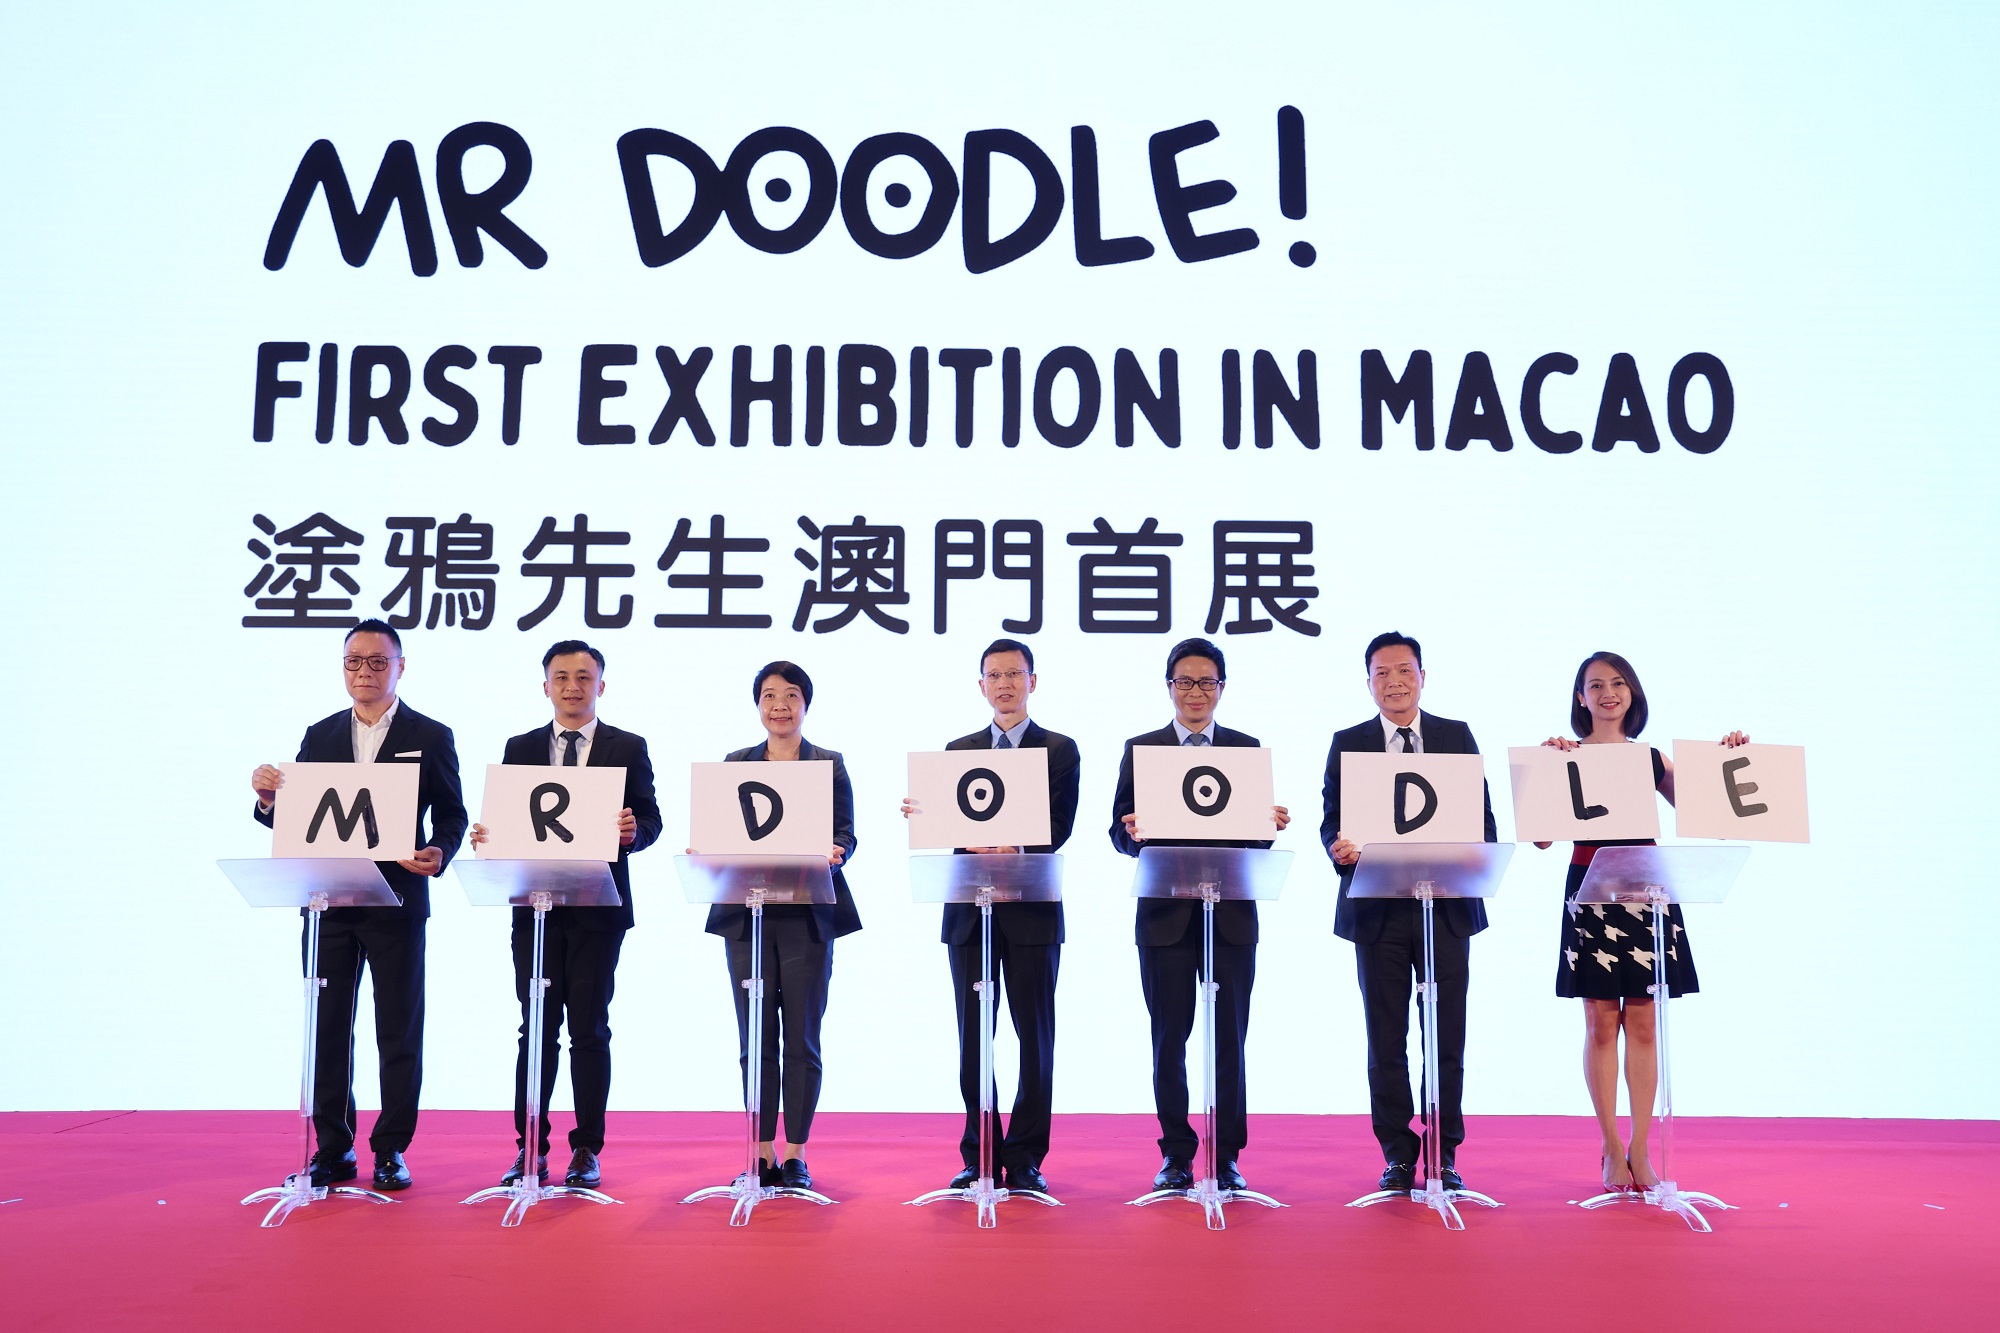 (From left to right) Mr. Patrick Fan, Founder and Chairman of the Board of Forward Fashion Group, Mr. Wong Ka Ki, Deputy Director of Education and Youth Development Bureau of Macao SAR, Ms. Leong Wai Man, President of Cultural Affairs Bureau of Macao SAR, Mr. Yin Rutao, Deputy Director of Department of Publicity and Culture of the Liaison Office of the Central People’s Government in the Macao SAR, Mr. Cheng Wai Tong, Deputy Director of Macao Government Tourism Office, Mr. Clarence Chung, Board Director of Melco Resorts & Entertainment and Ms. Christy Cheong, Vice President of Events & Promotions of Melco Resorts & Entertainment, officiated the opening ceremony of “Mr Doodle First Exhibition in Macao” at the Main Portal of City of Dreams on Tuesday.